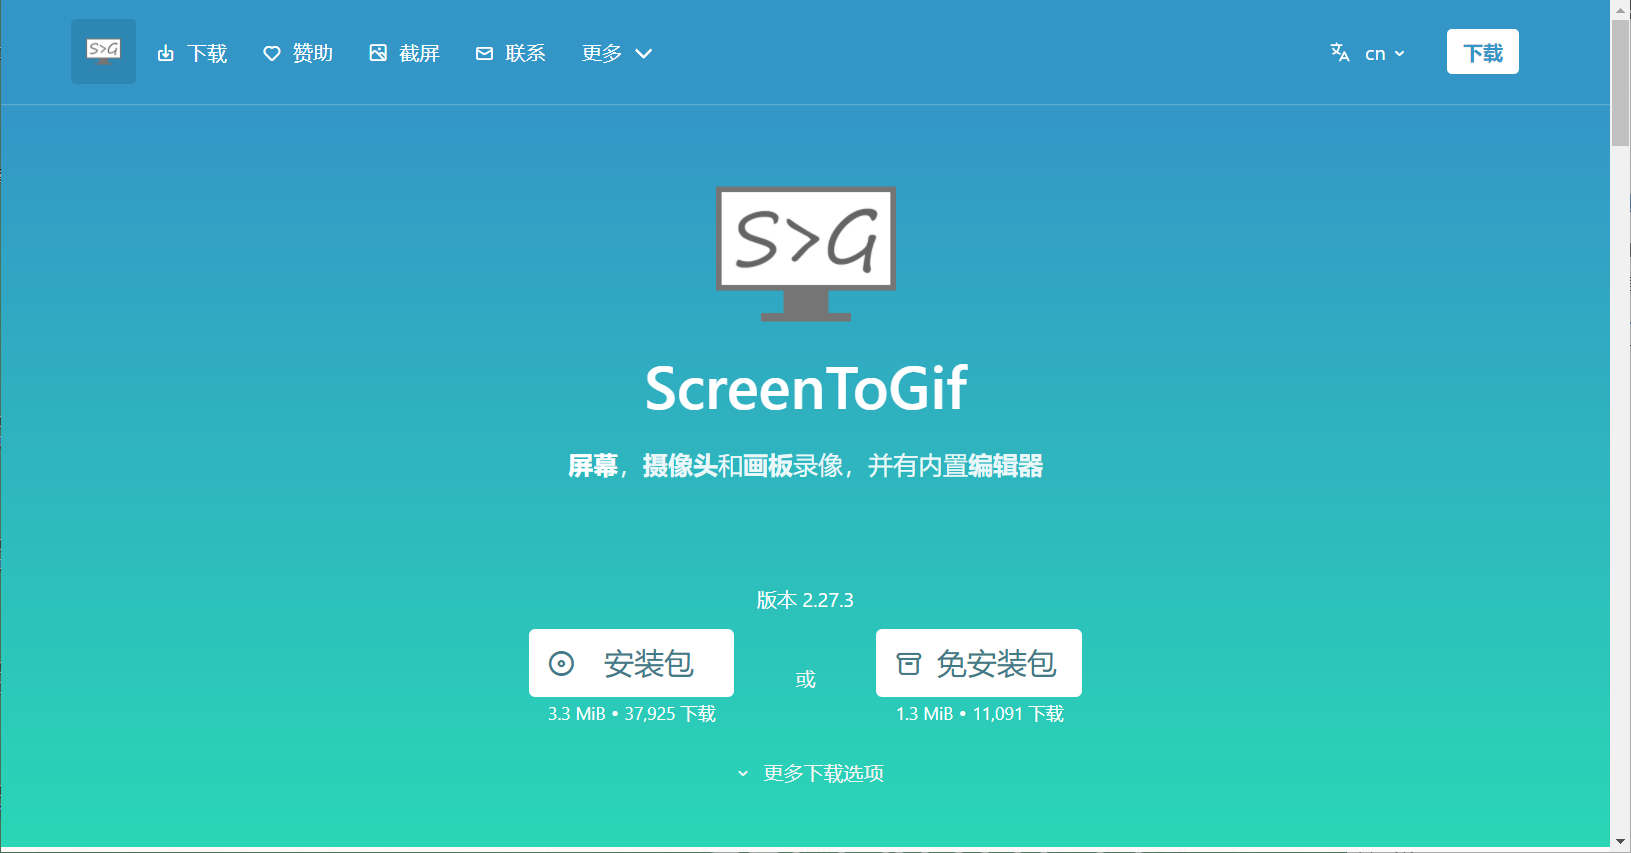 ScreenToGif 2.39 instal the new version for iphone